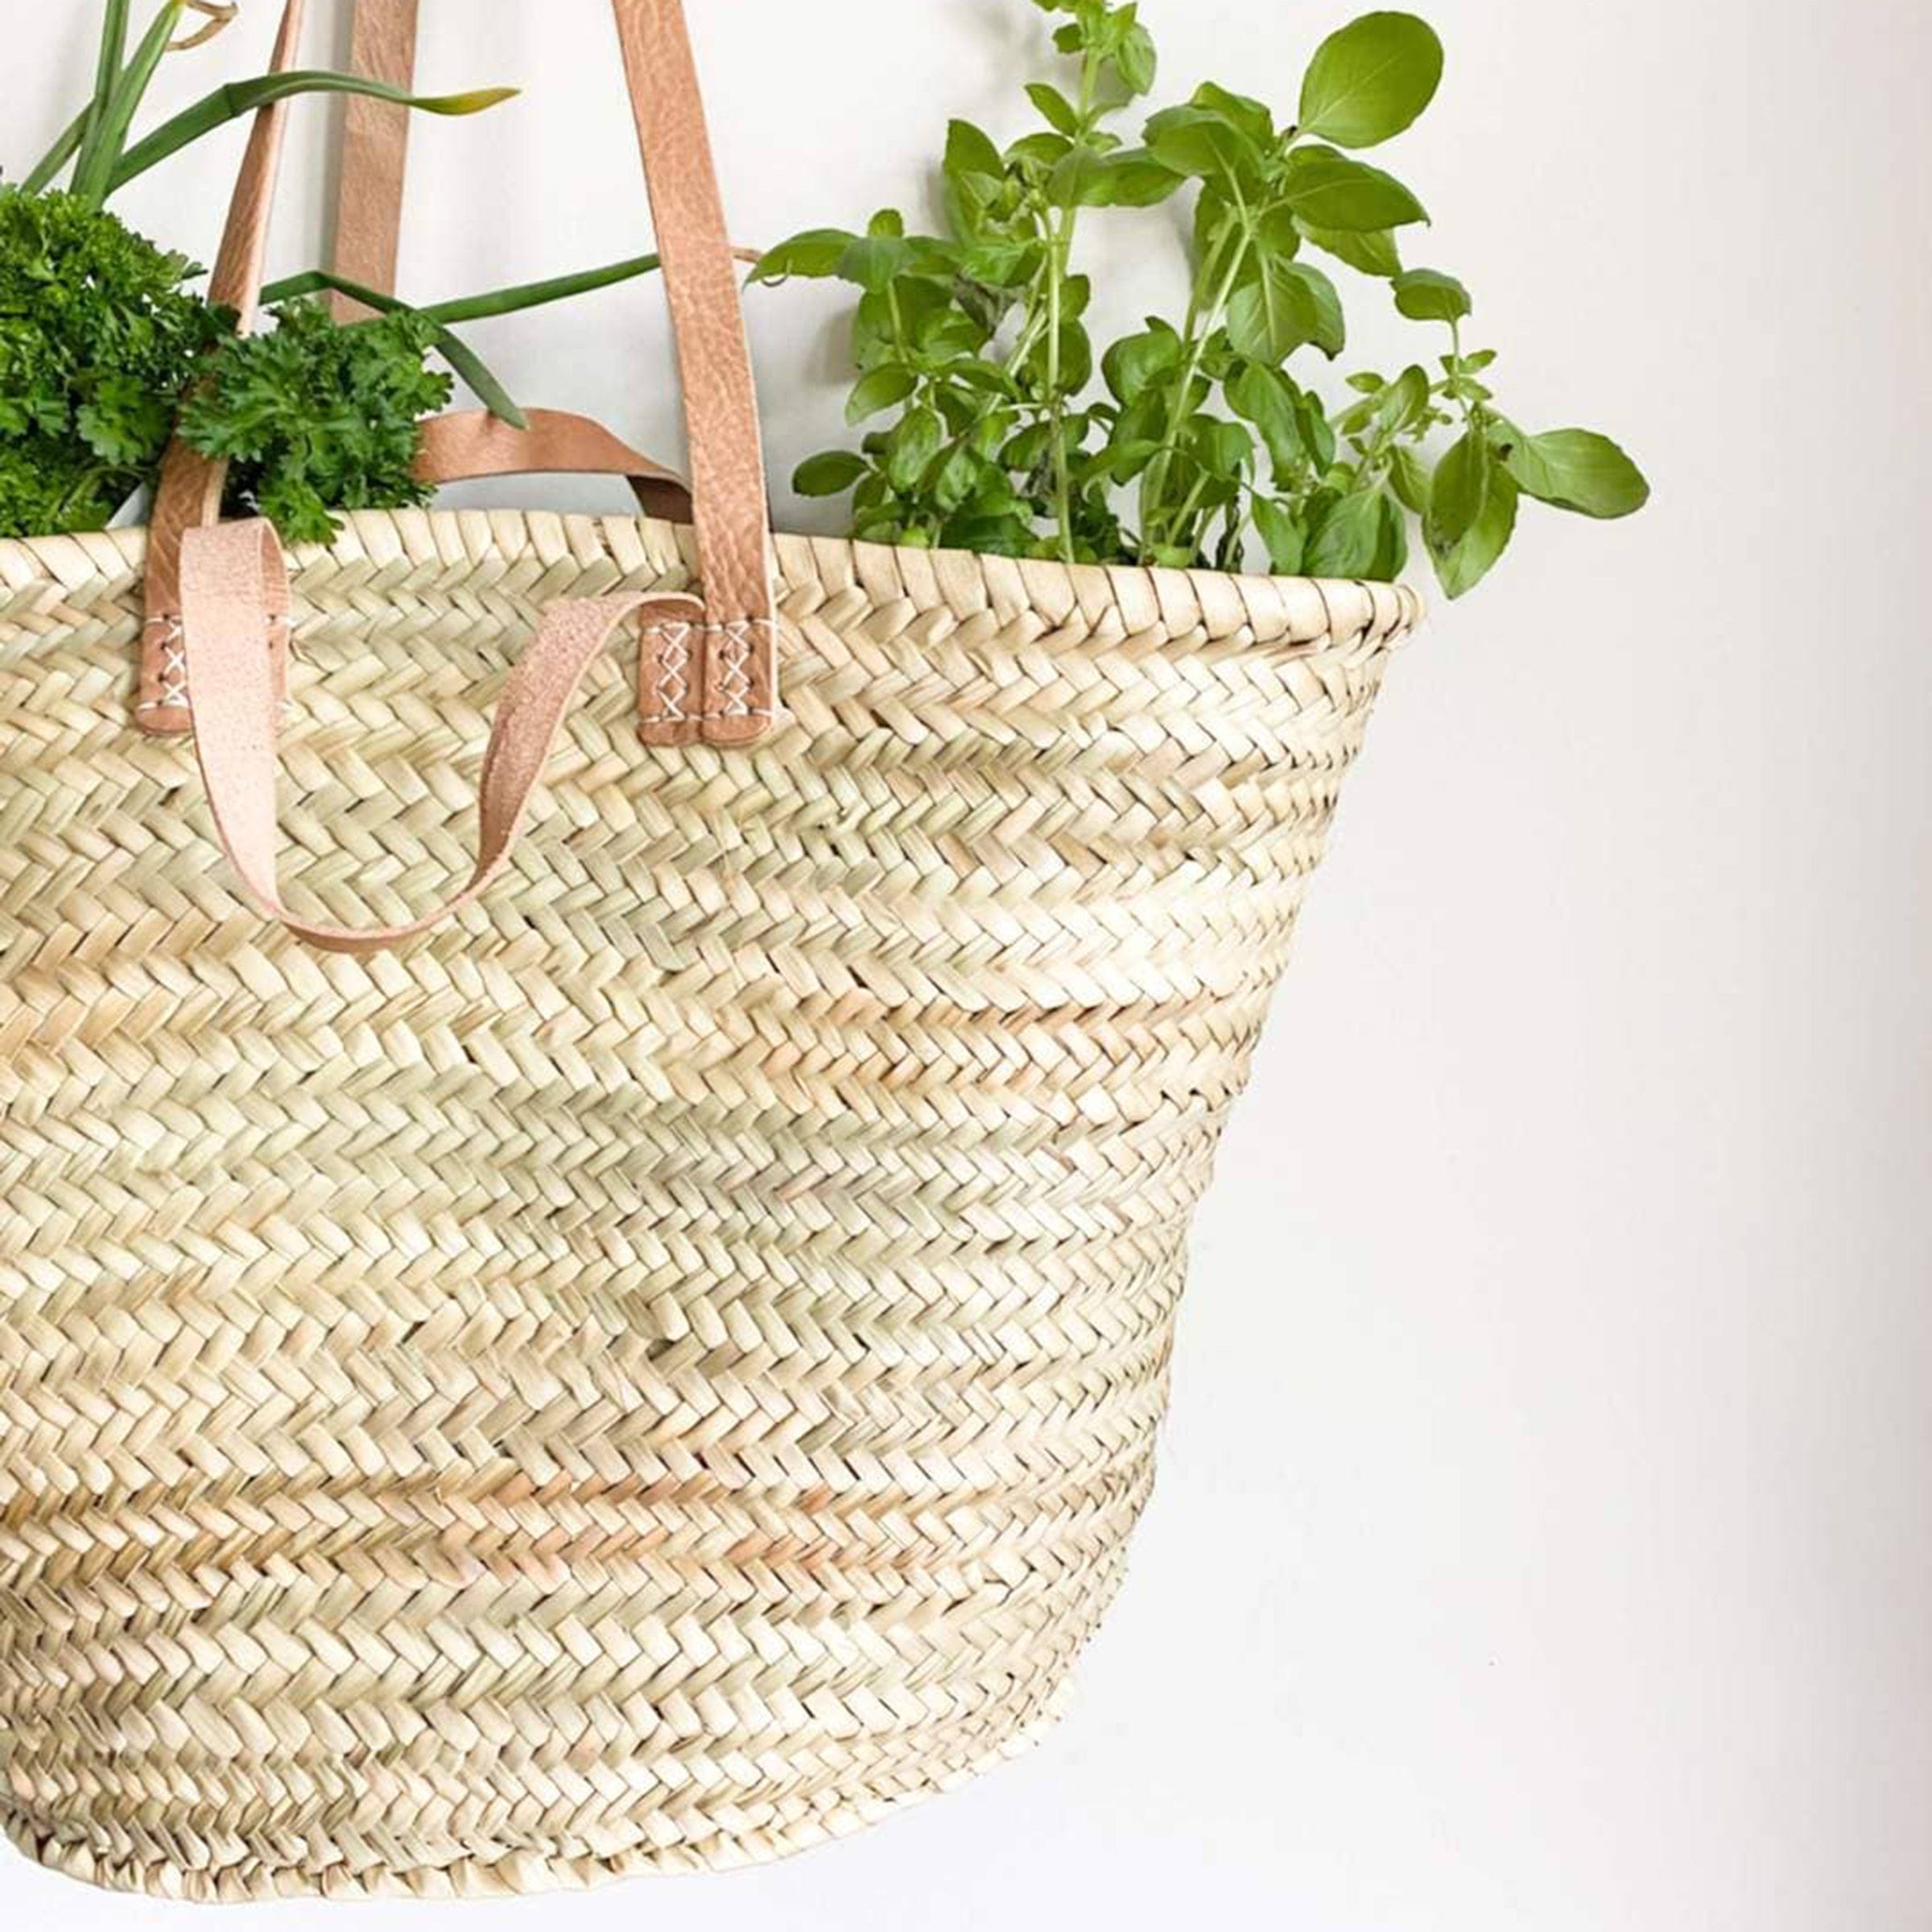 Iconic straw bag French Basket and Detachable Inside Pocket french market  basket | French Baskets